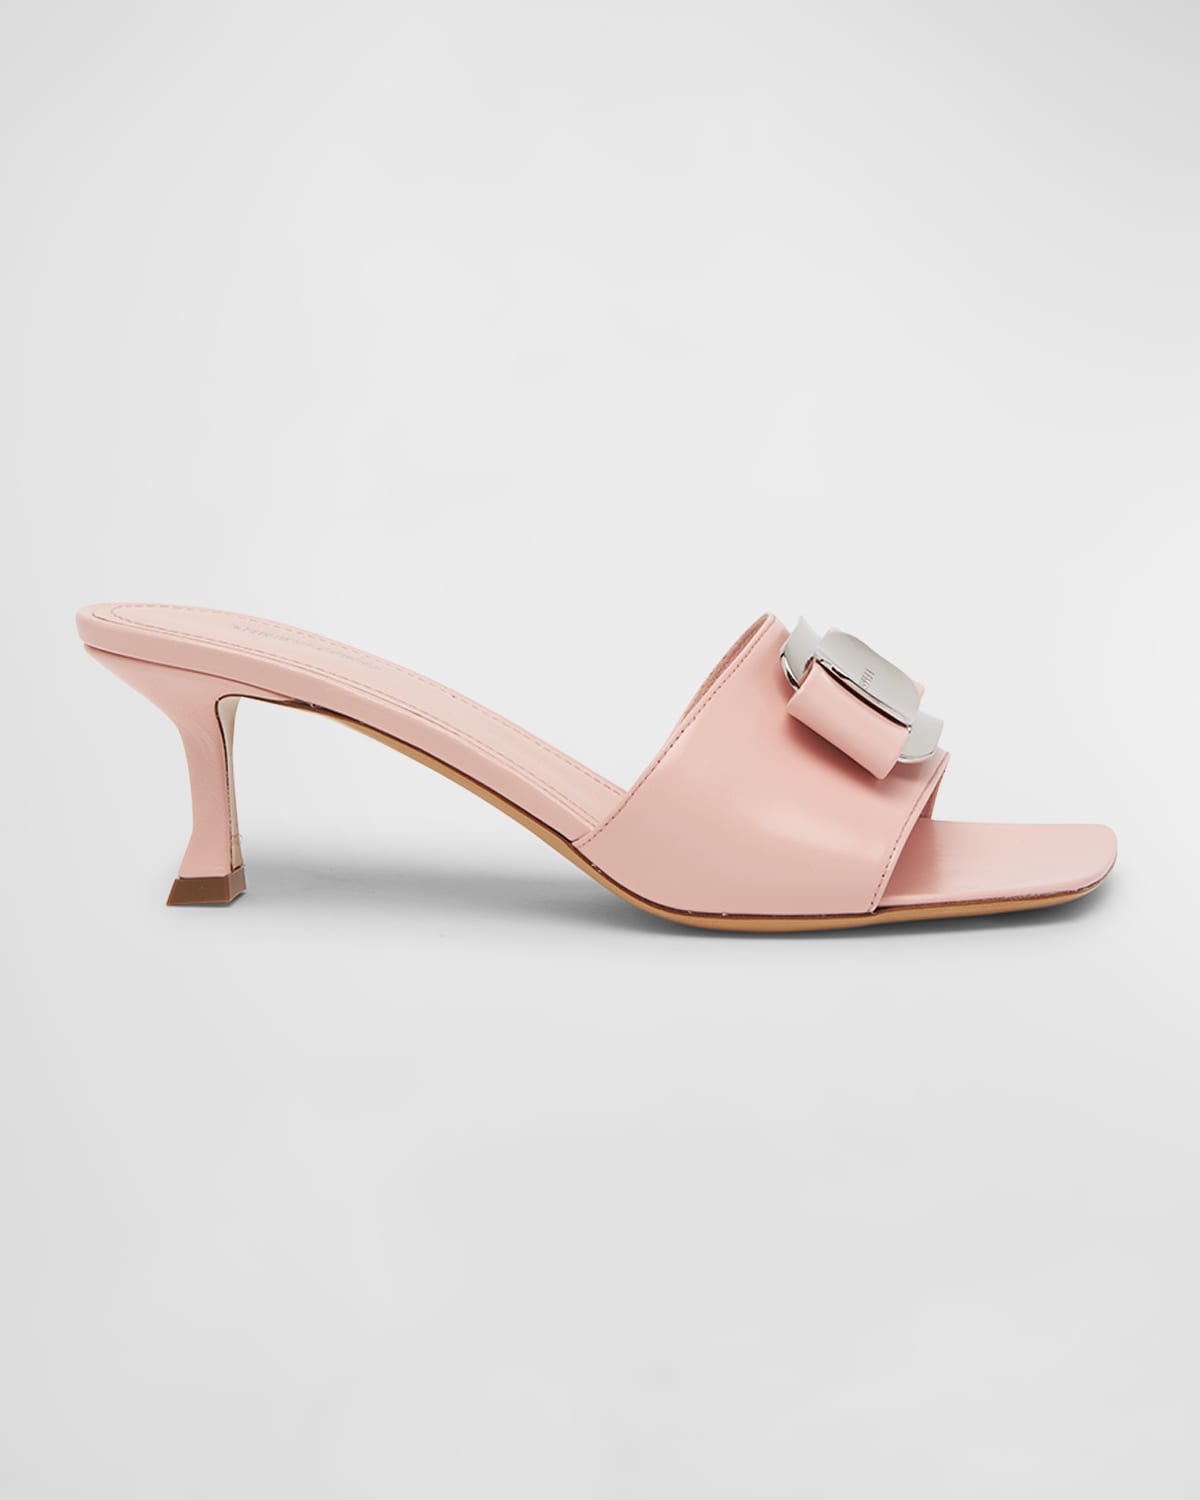 Shop Ferragamo Zelie Leather Bow Mule Sandals In Nylund